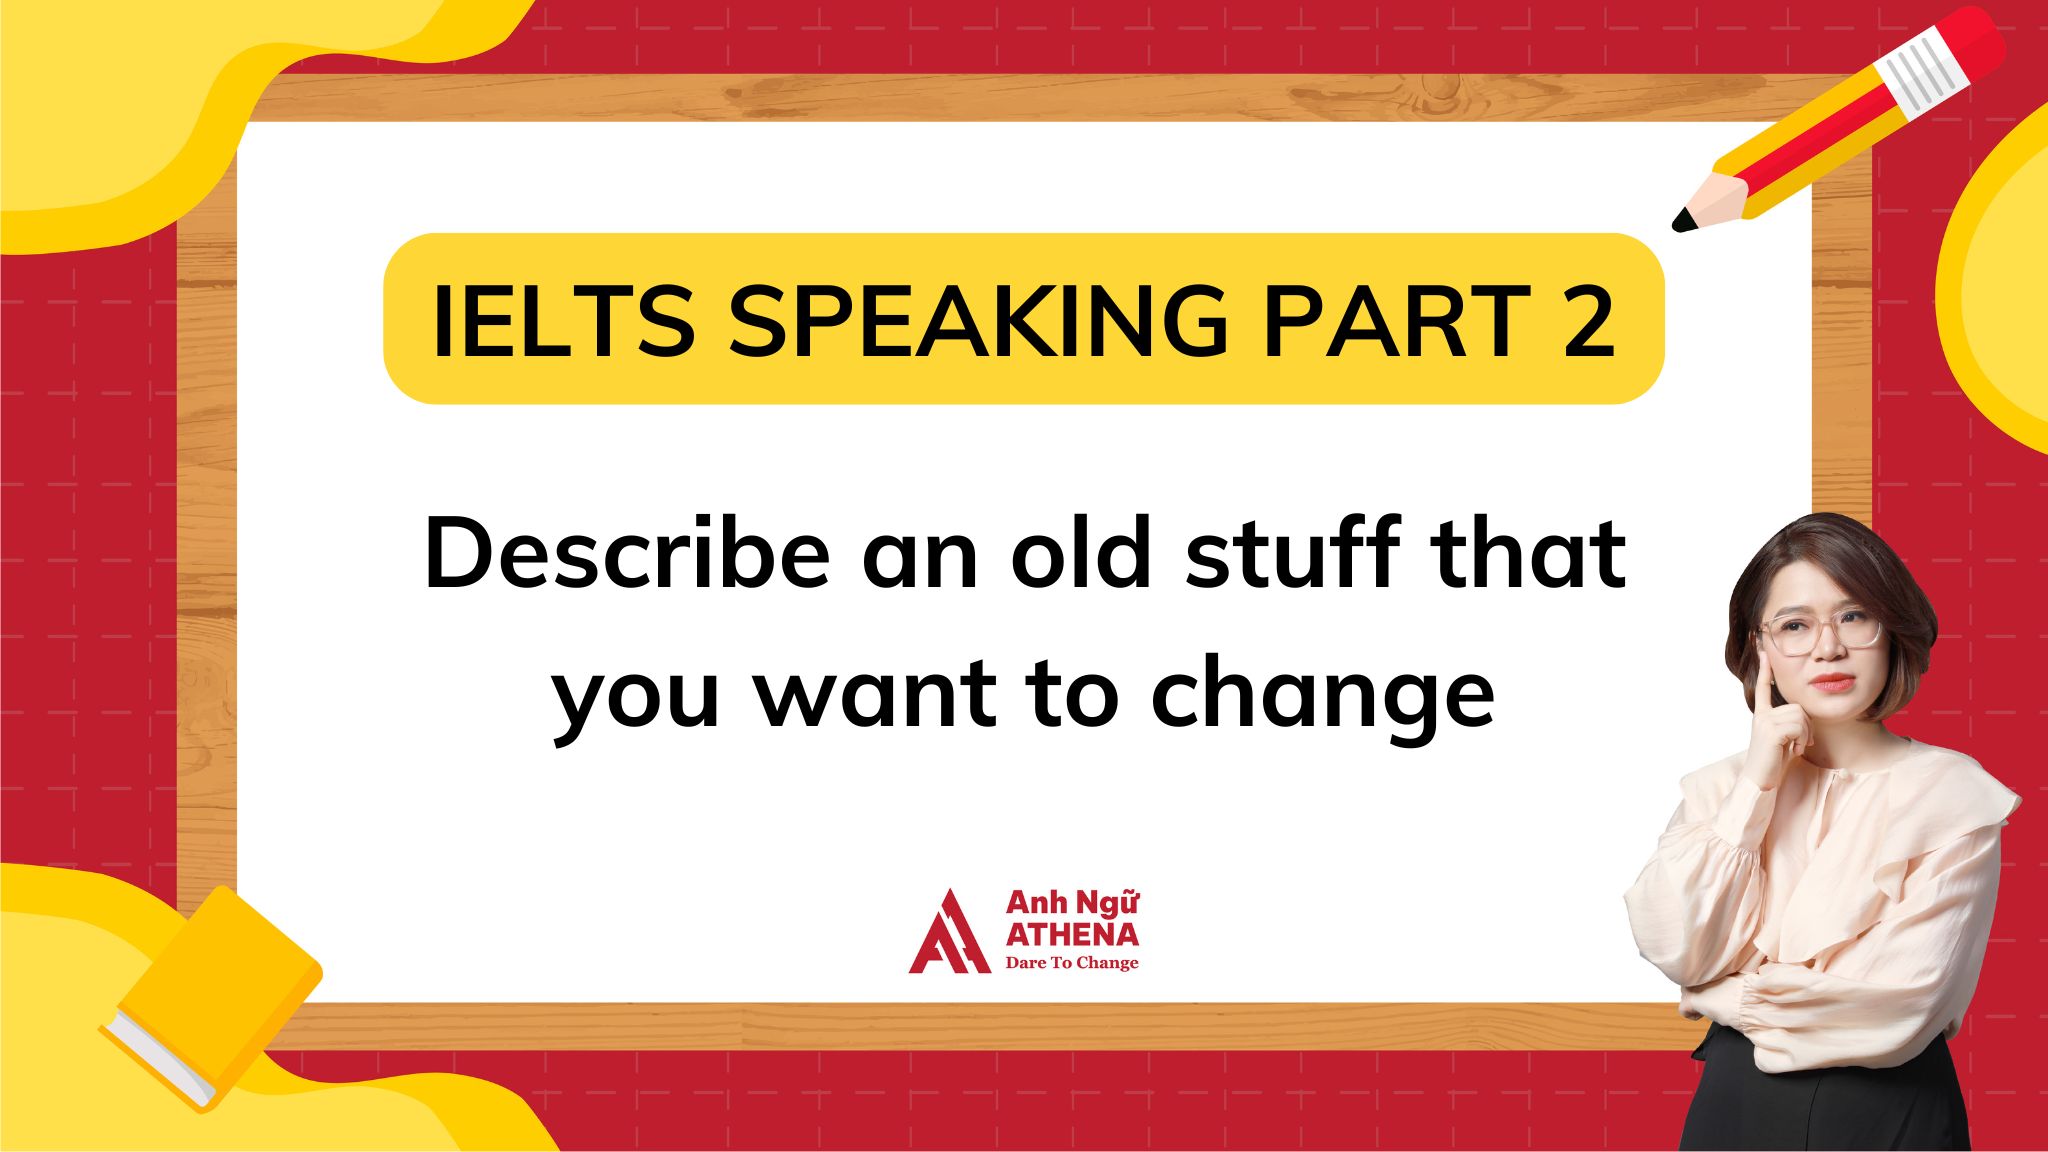 Giải đề: Describe an old stuff that you want to change